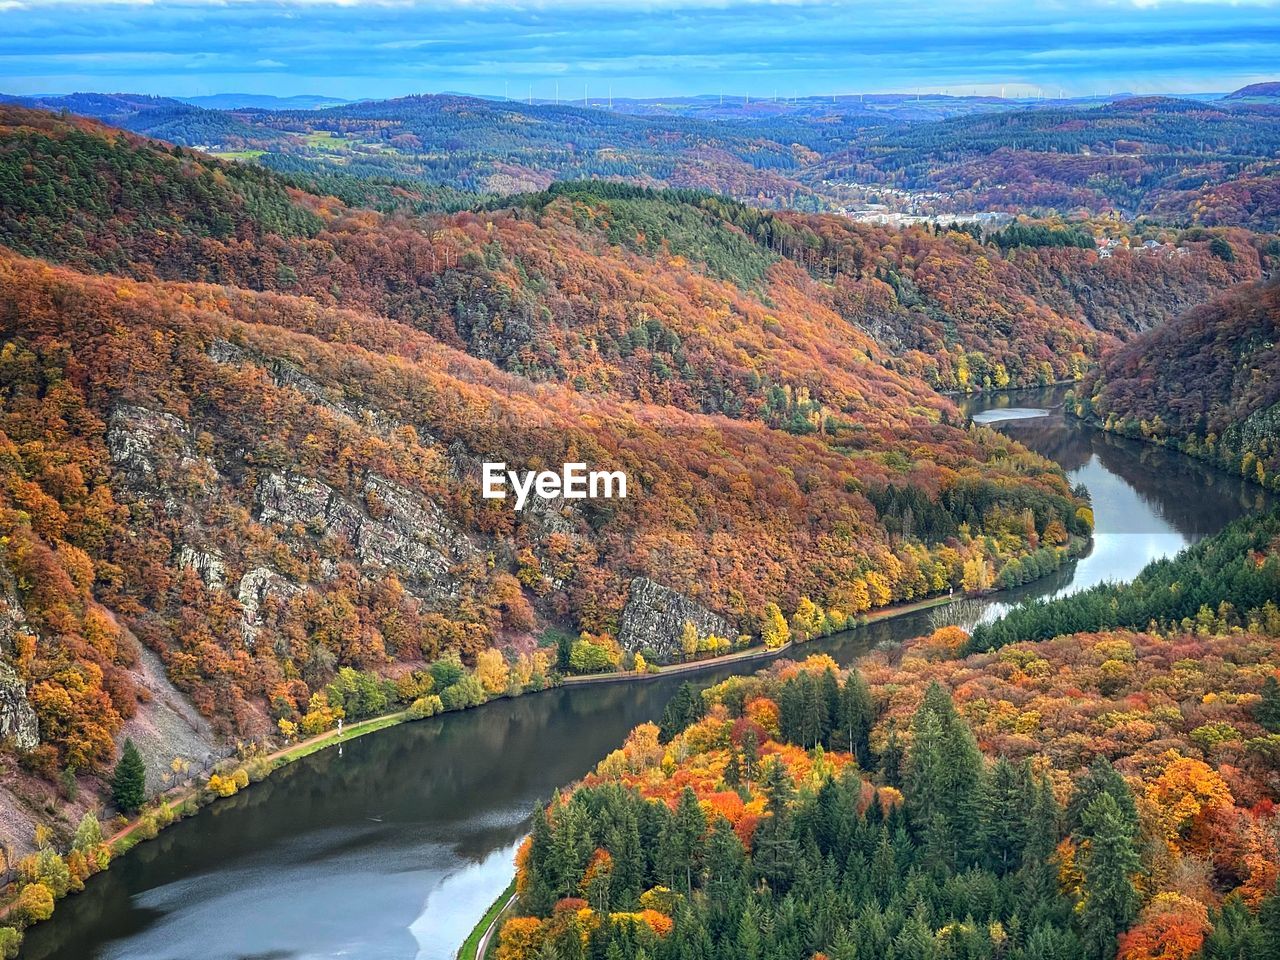 SCENIC VIEW OF RIVER AMIDST AUTUMN TREES